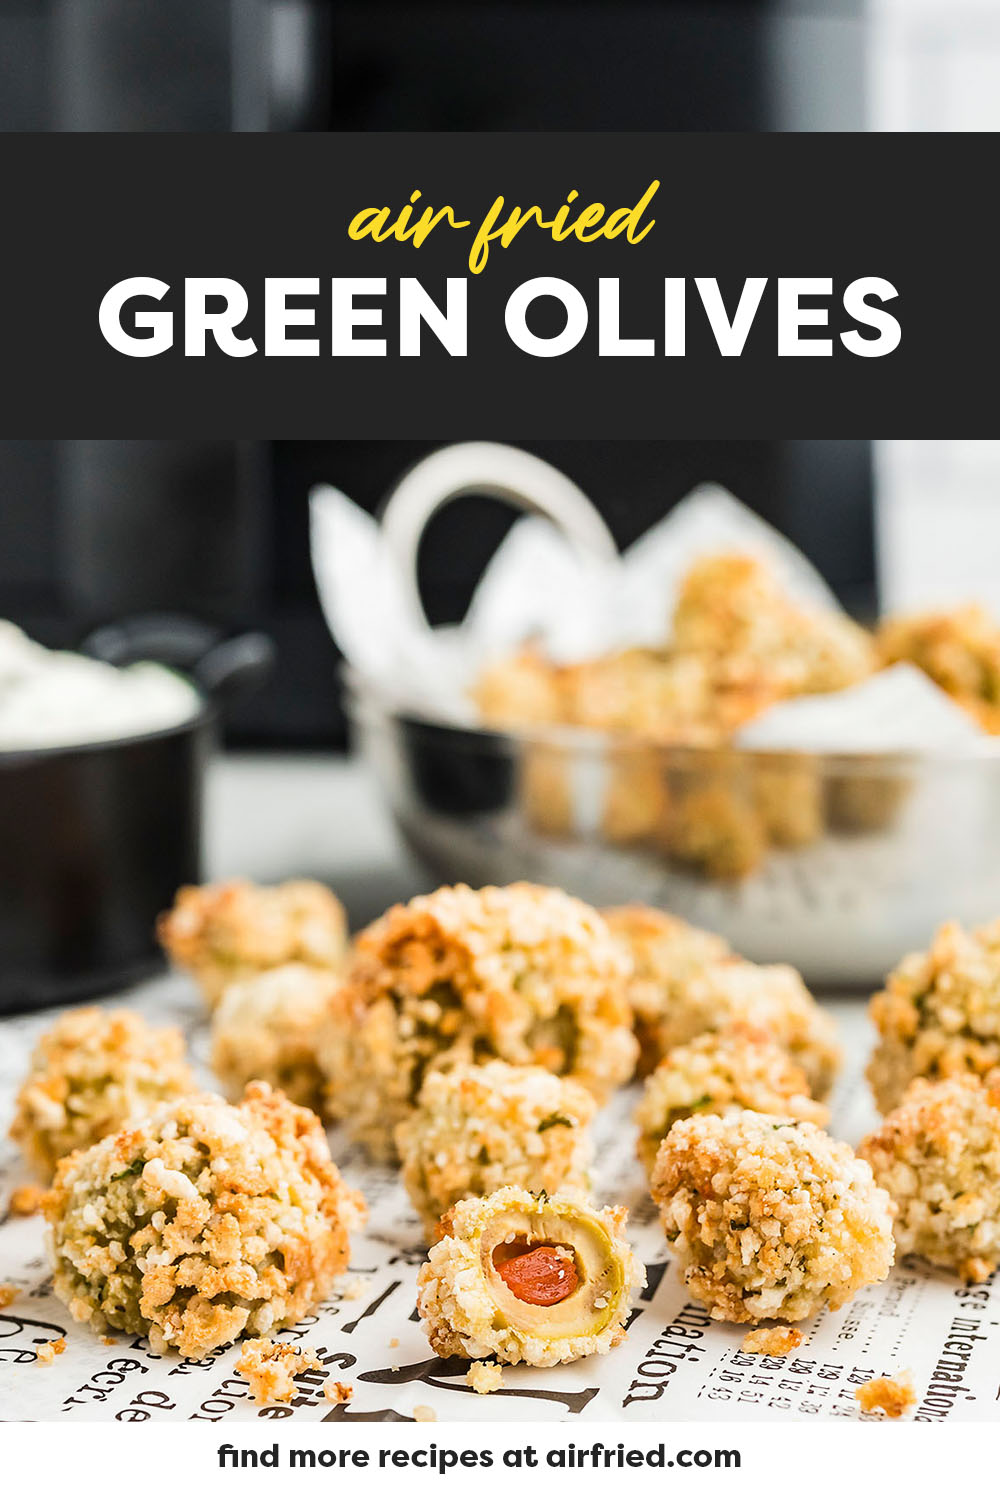 The best part of air fryer fried olives is their crispy coating combined with the flavorful filling of briny, salty olives., but keeping the clean up really easy!